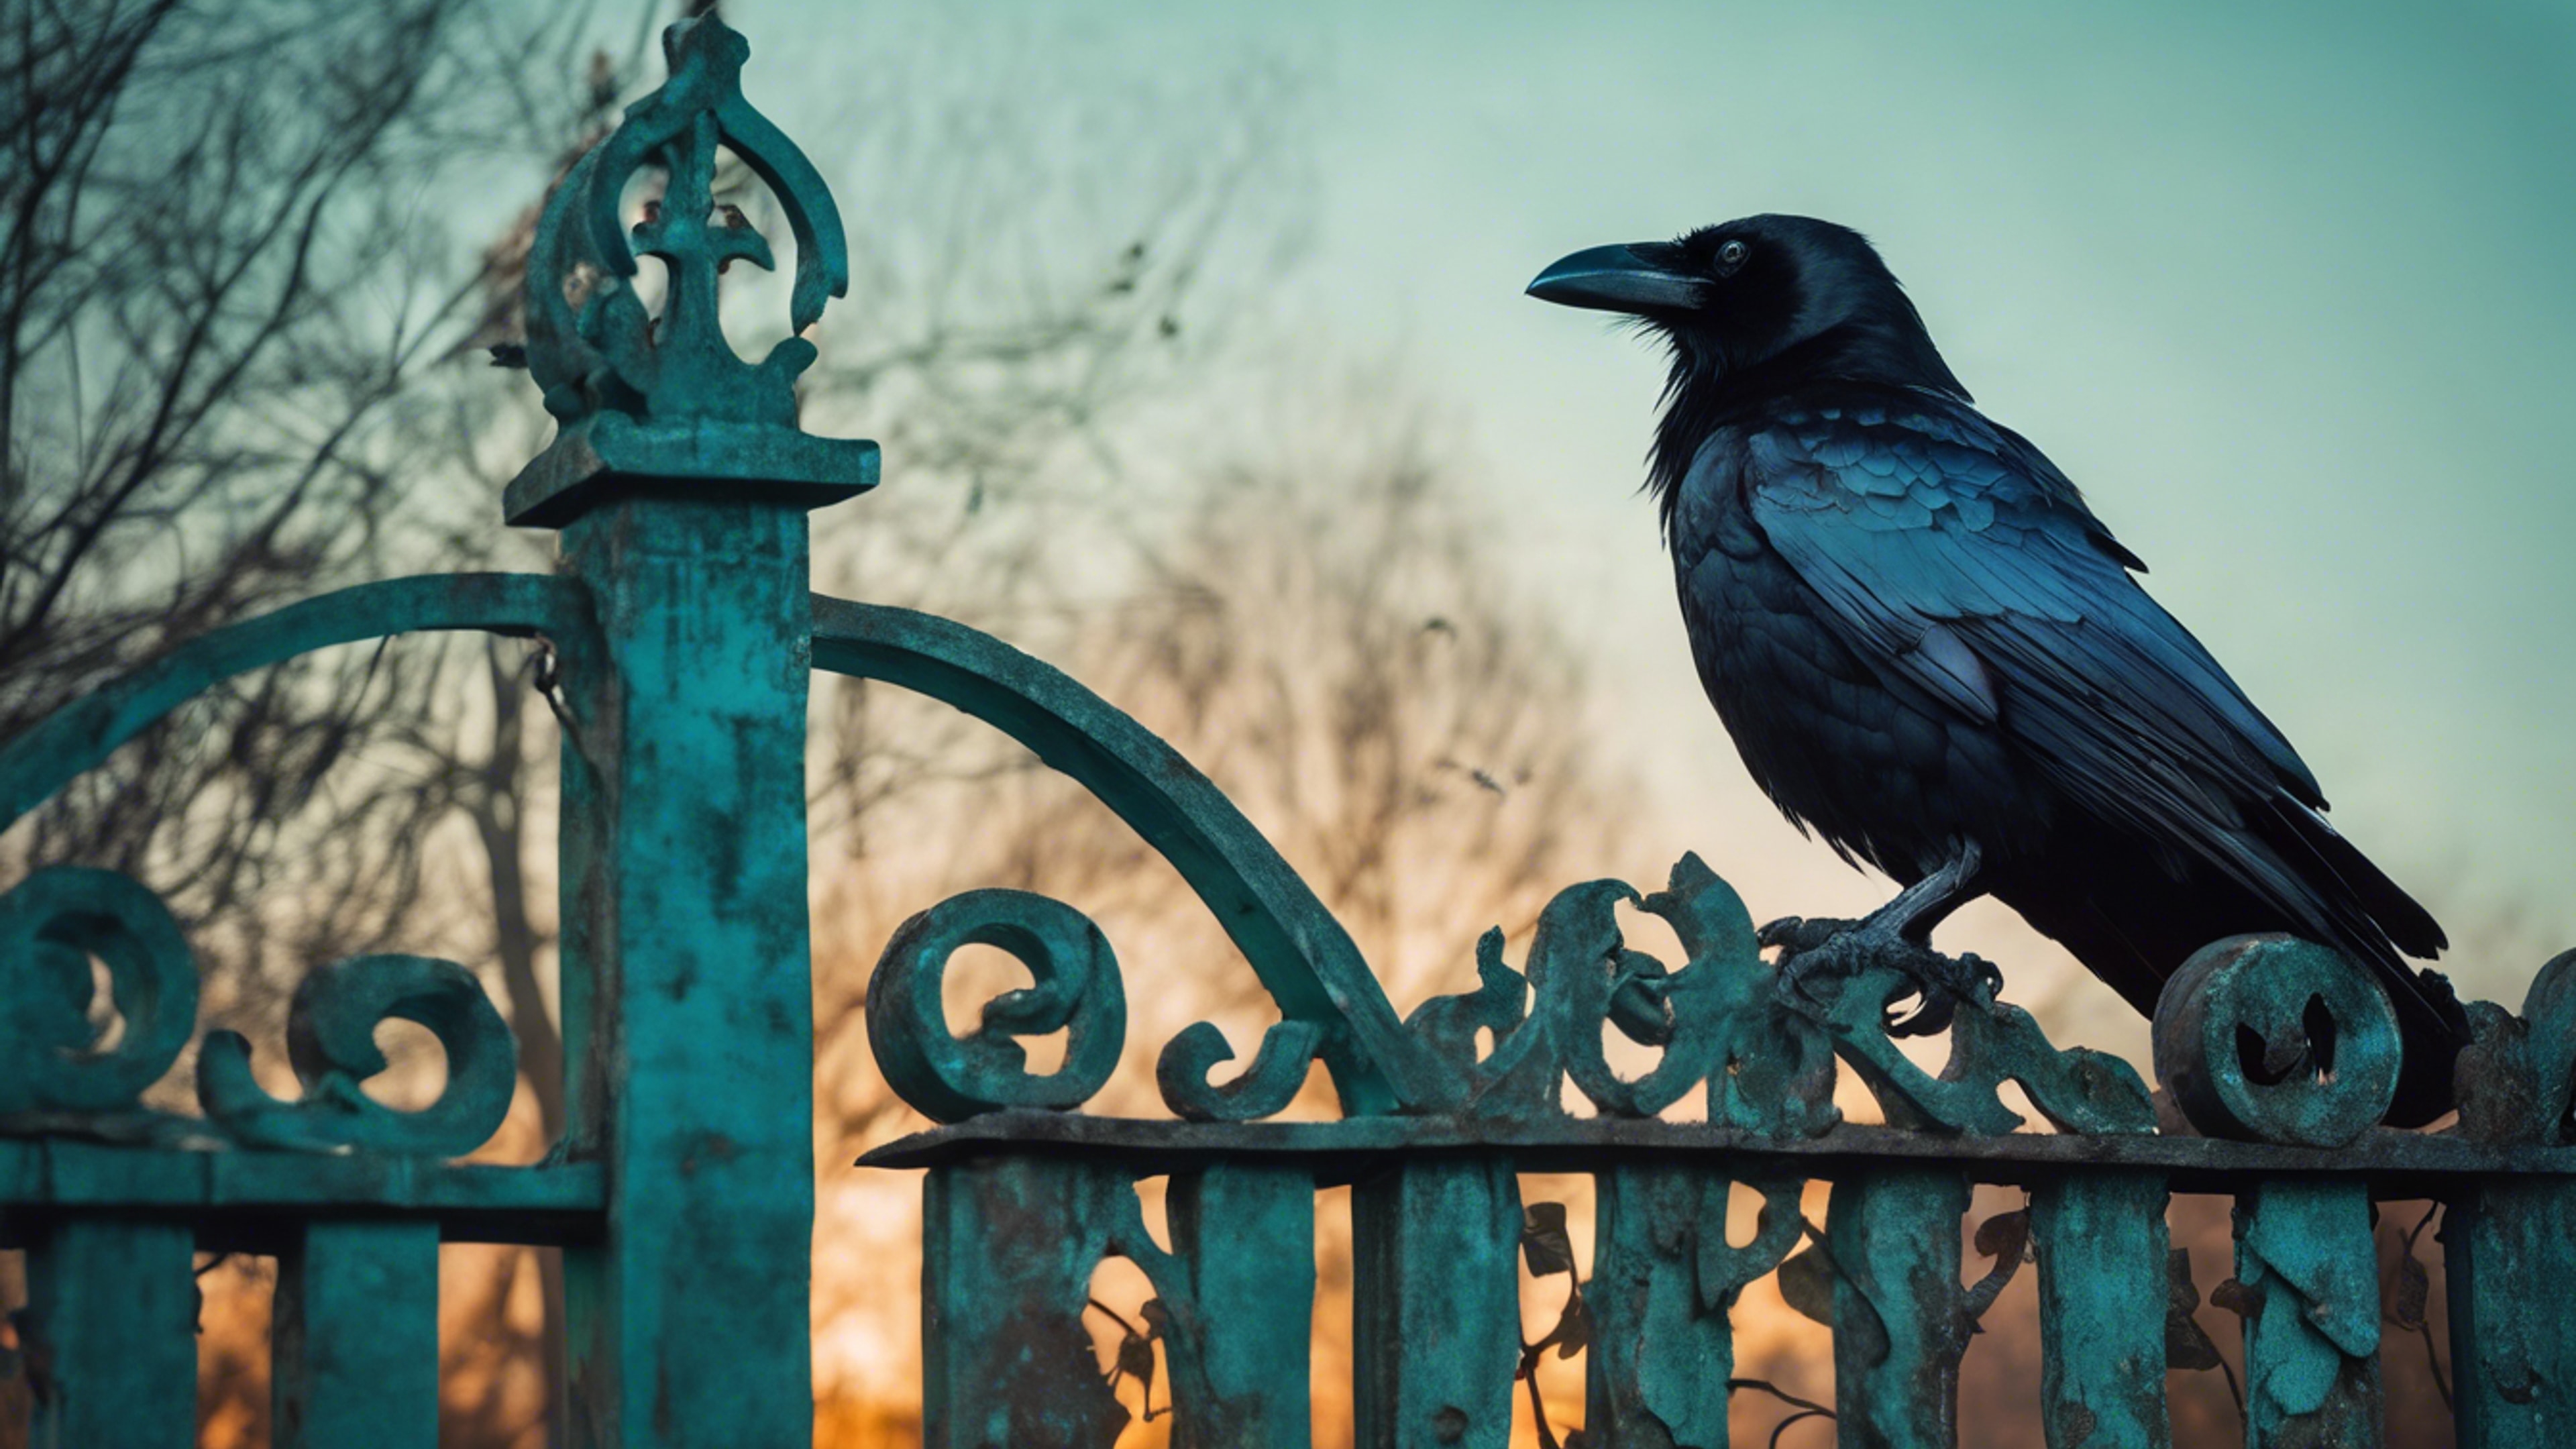 A Gothic raven perched on a dilapidated garden gate, aglow with the mesmerizing light of a teal moon. Tapetai[c5fc313733614ce1ad34]